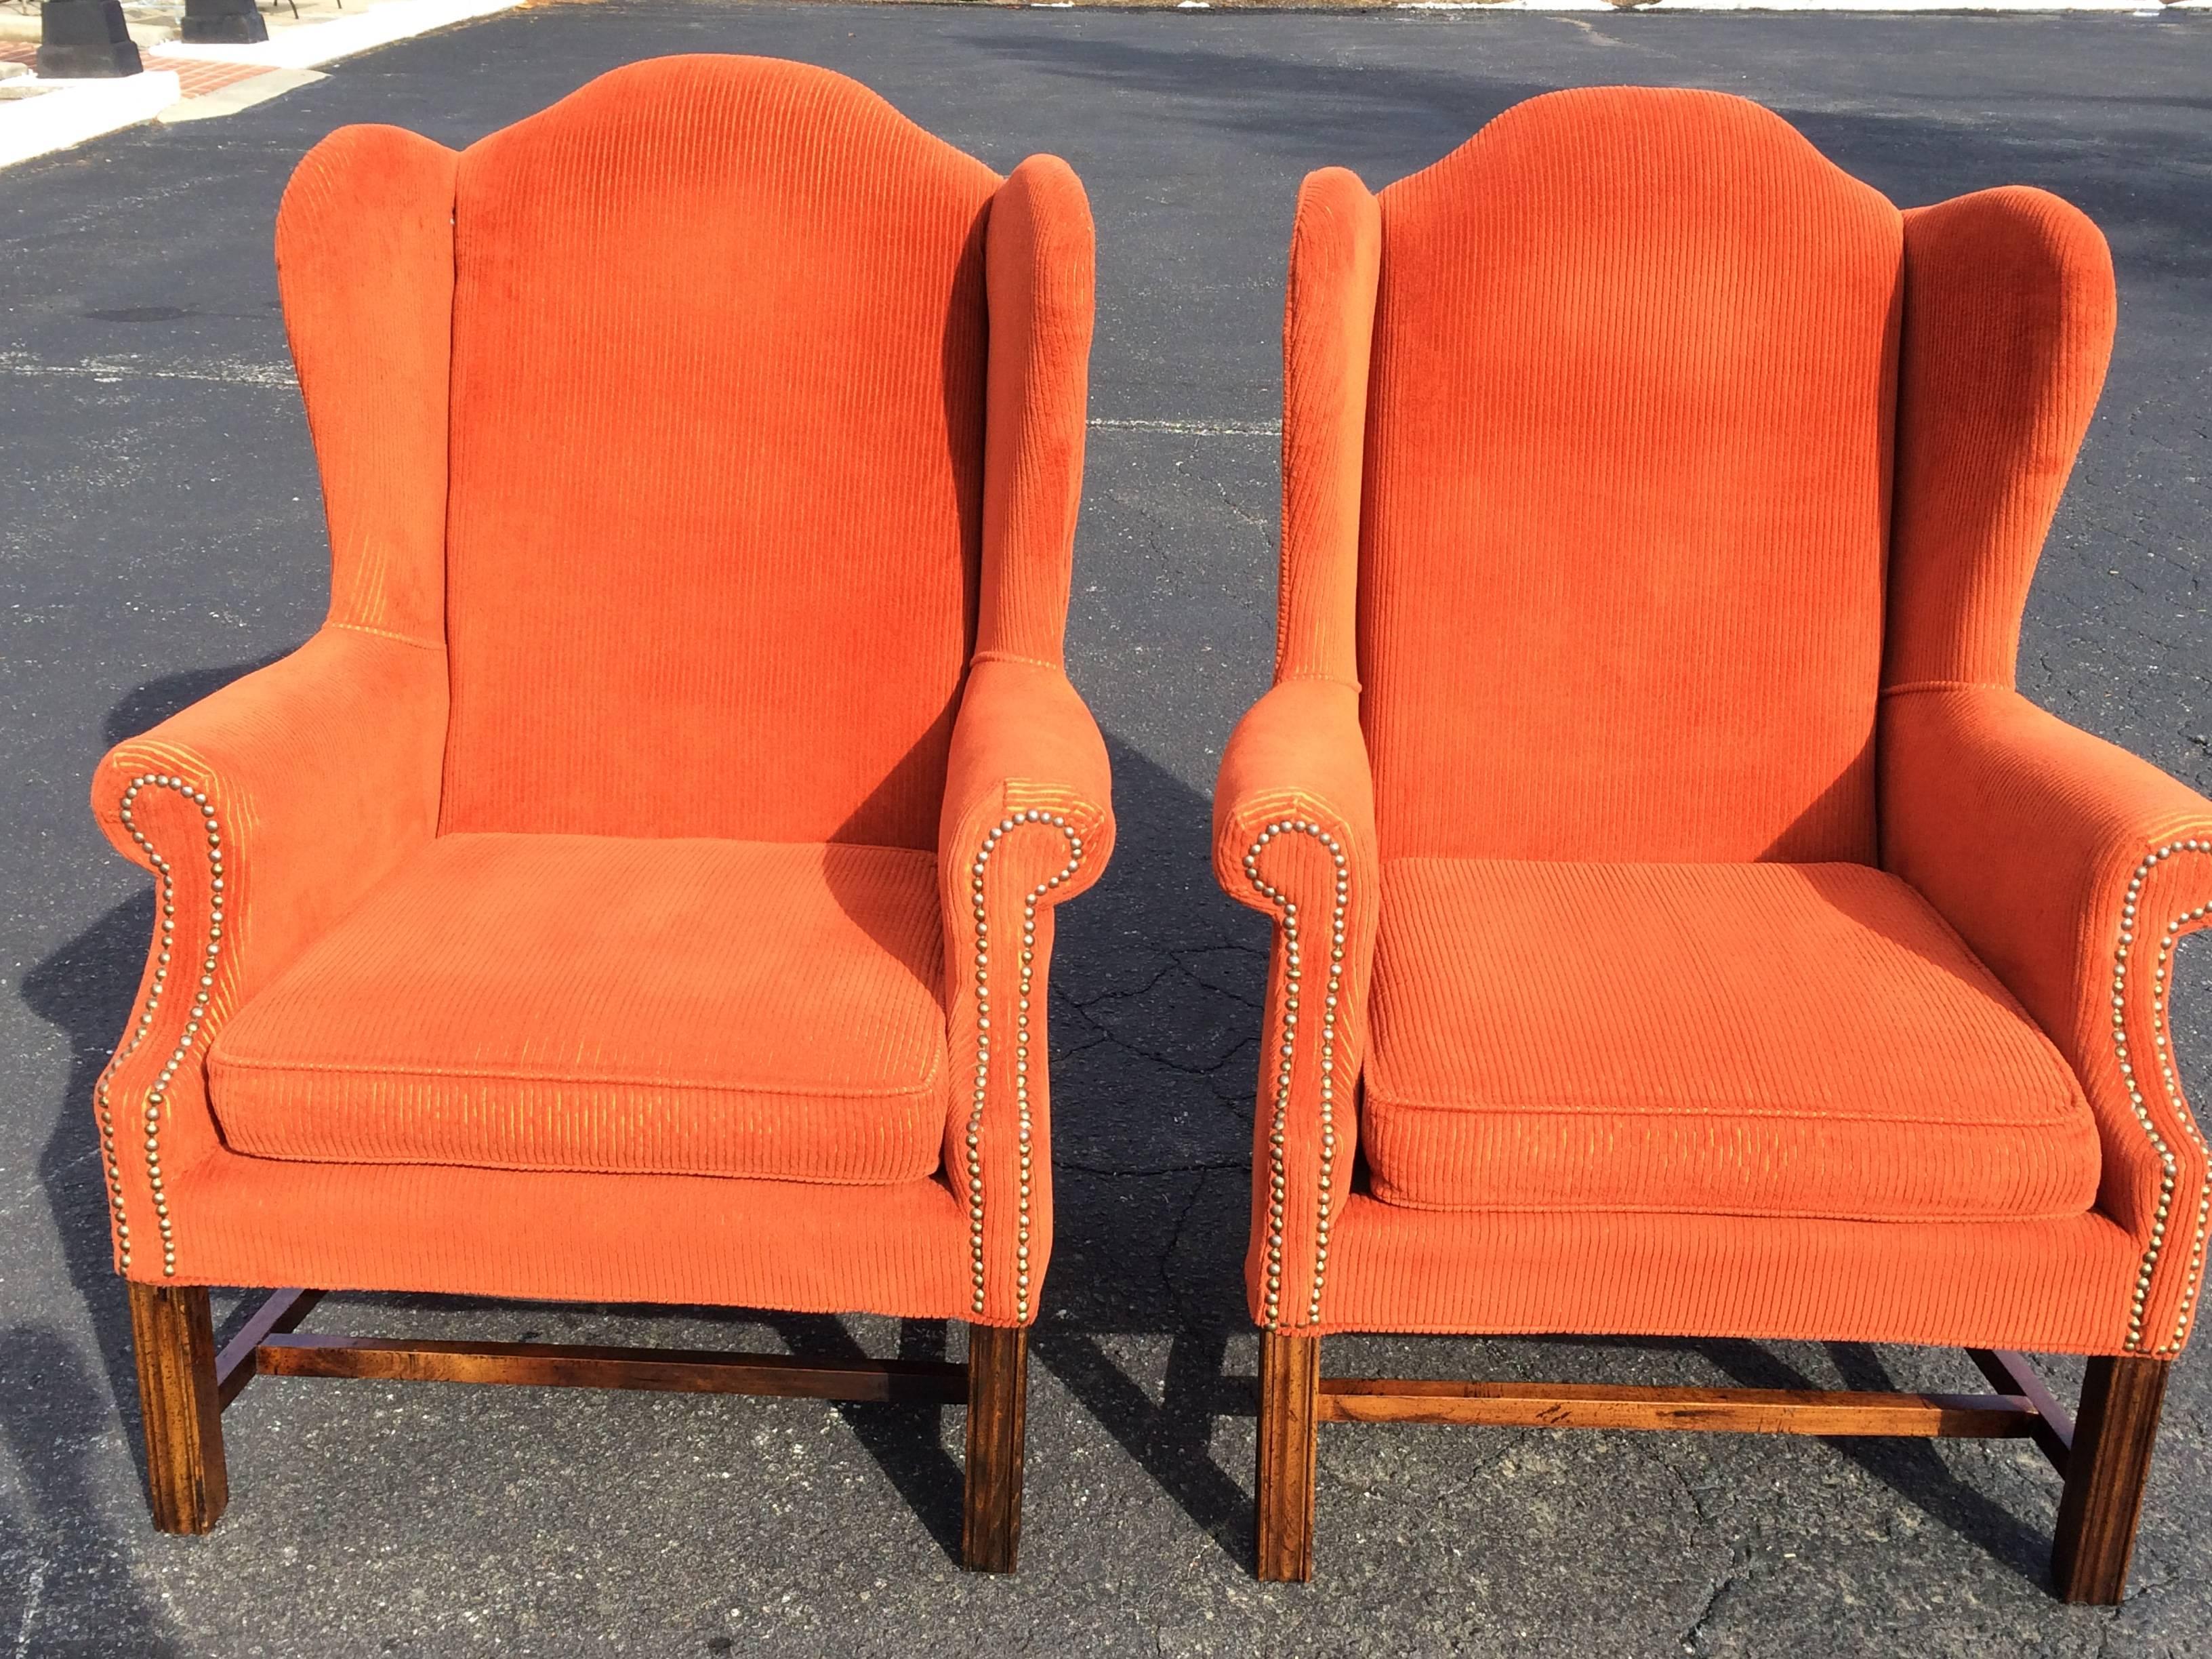 Brass Pair of Orange Corduroy Wing Back Chairs